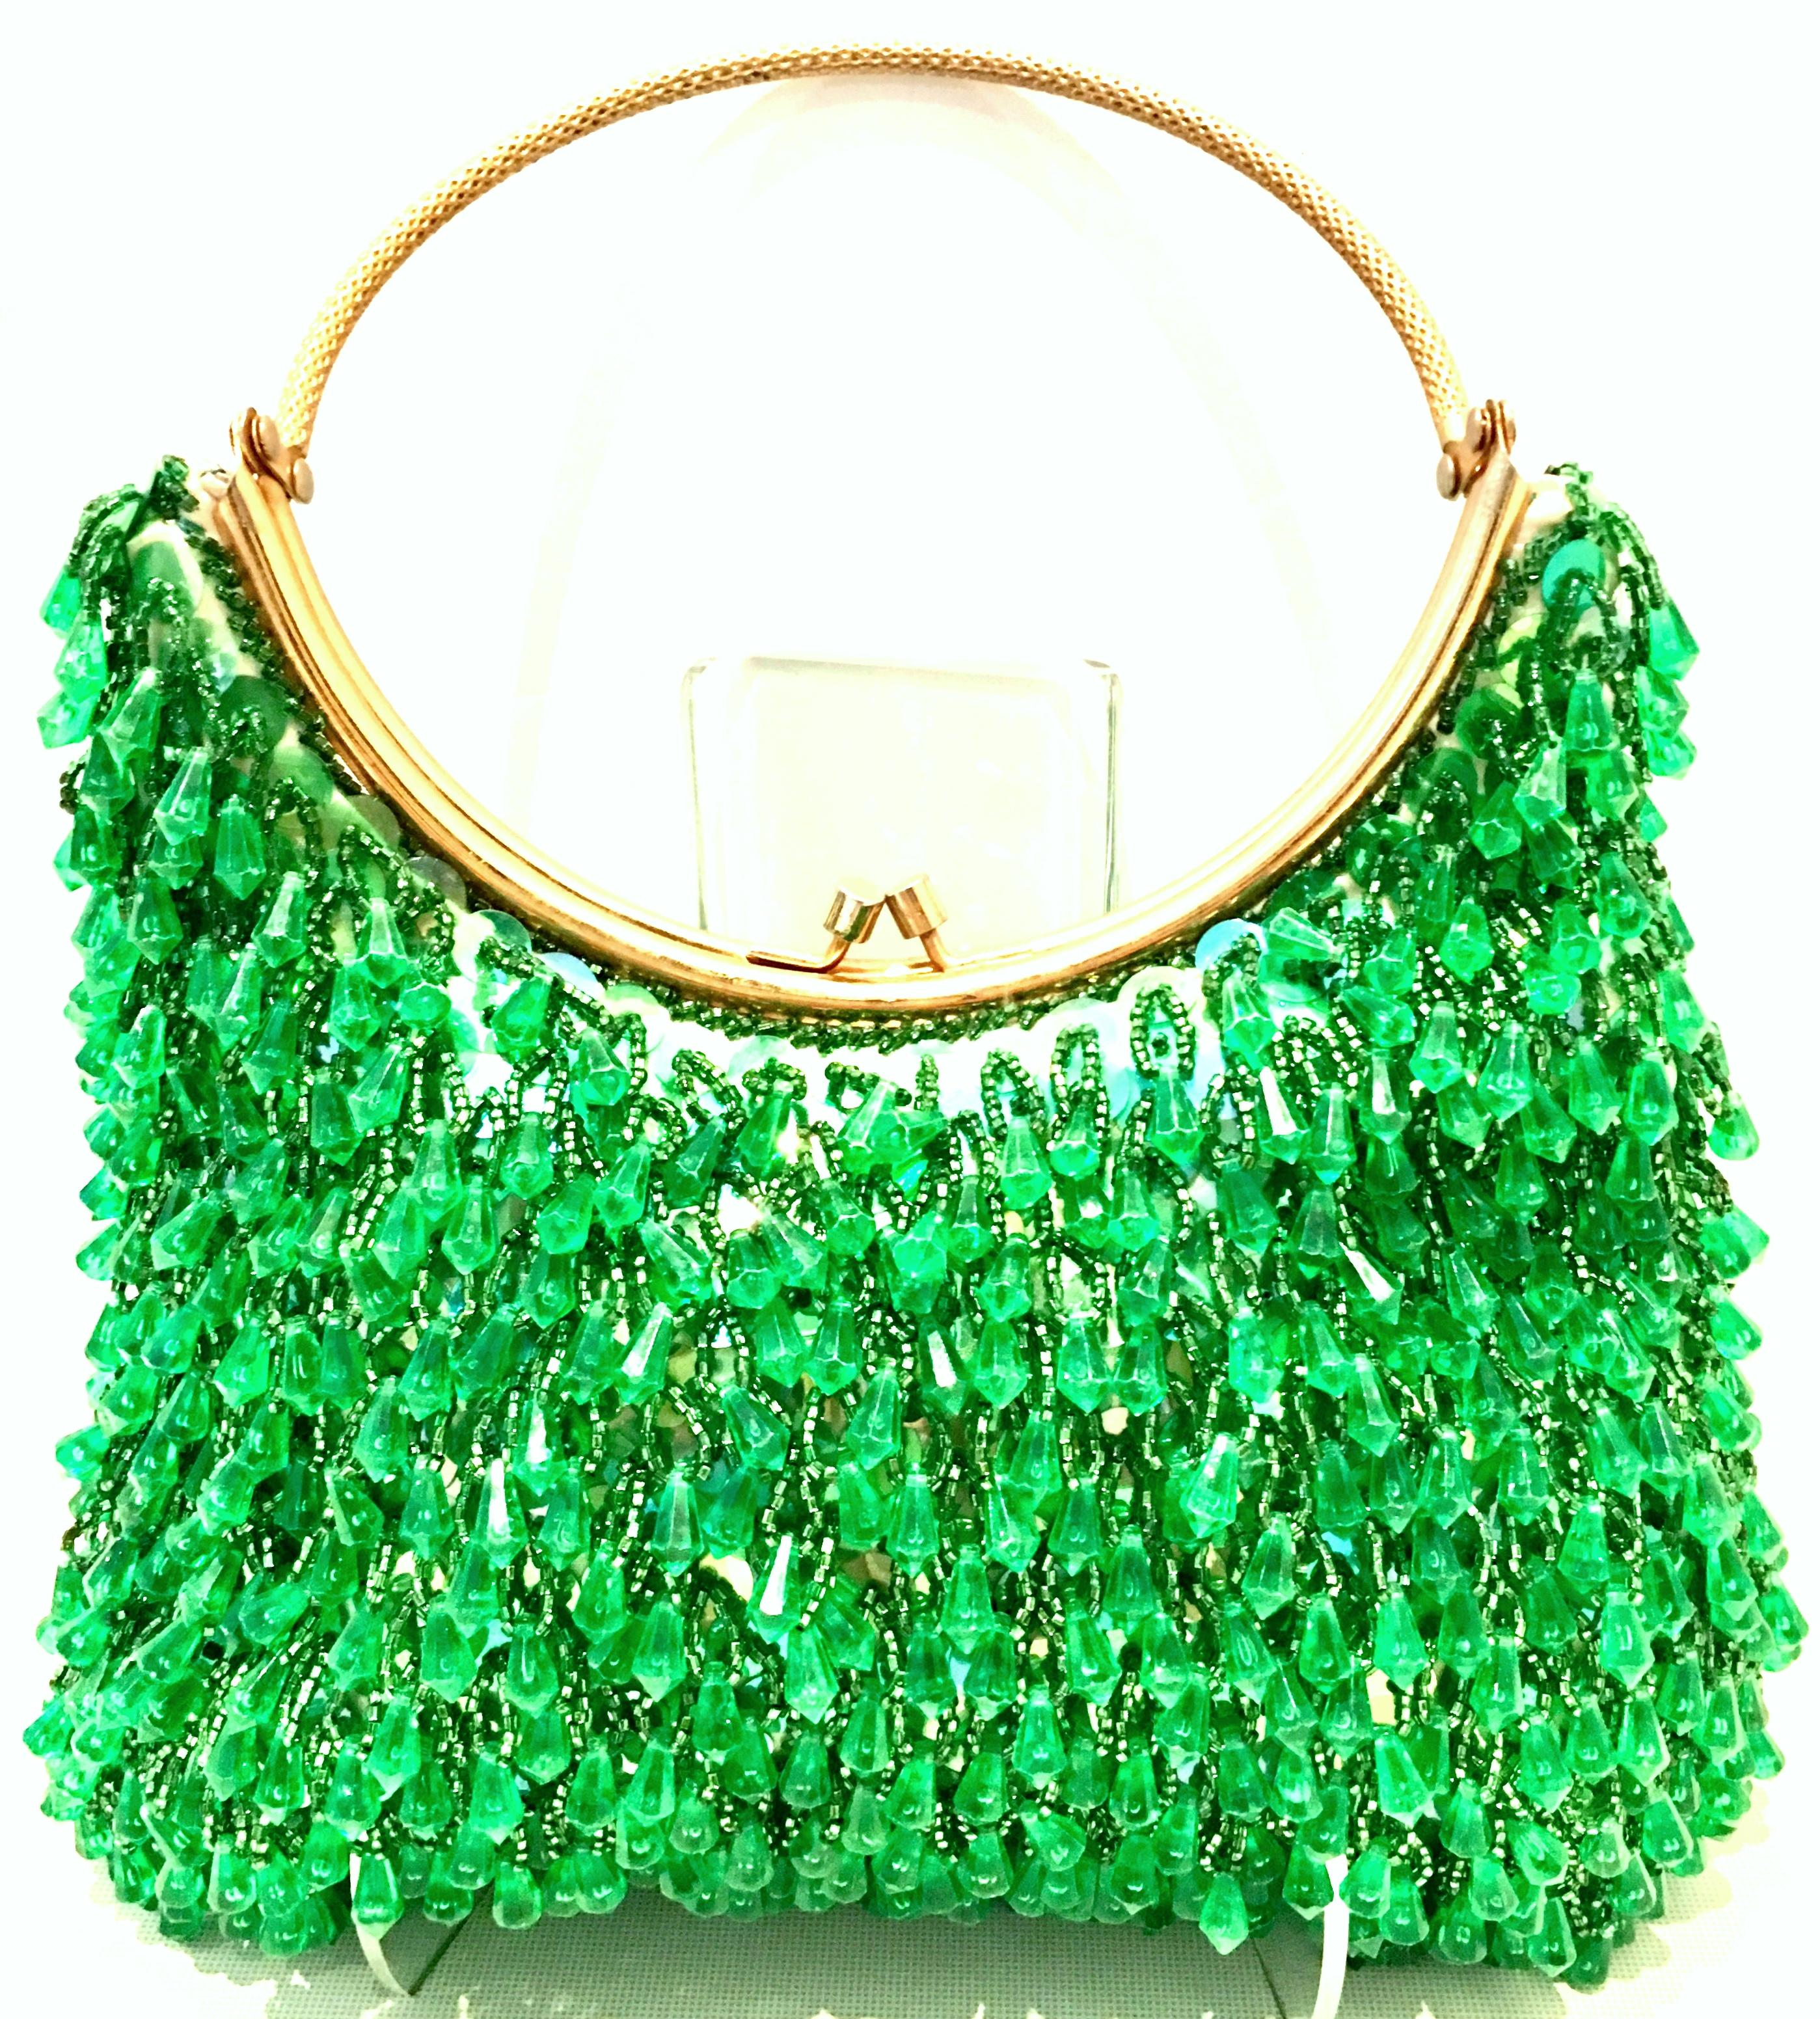 Mid-20th Century Gold Plate, Crystal Bead & Sequin Evening Bag By, Richere-Hong Kong. This rate and coveted hand bag features a gold gilt brass round handle with
vibrant green crystal beads and iridescent green sequins. Fully lined in satin with one